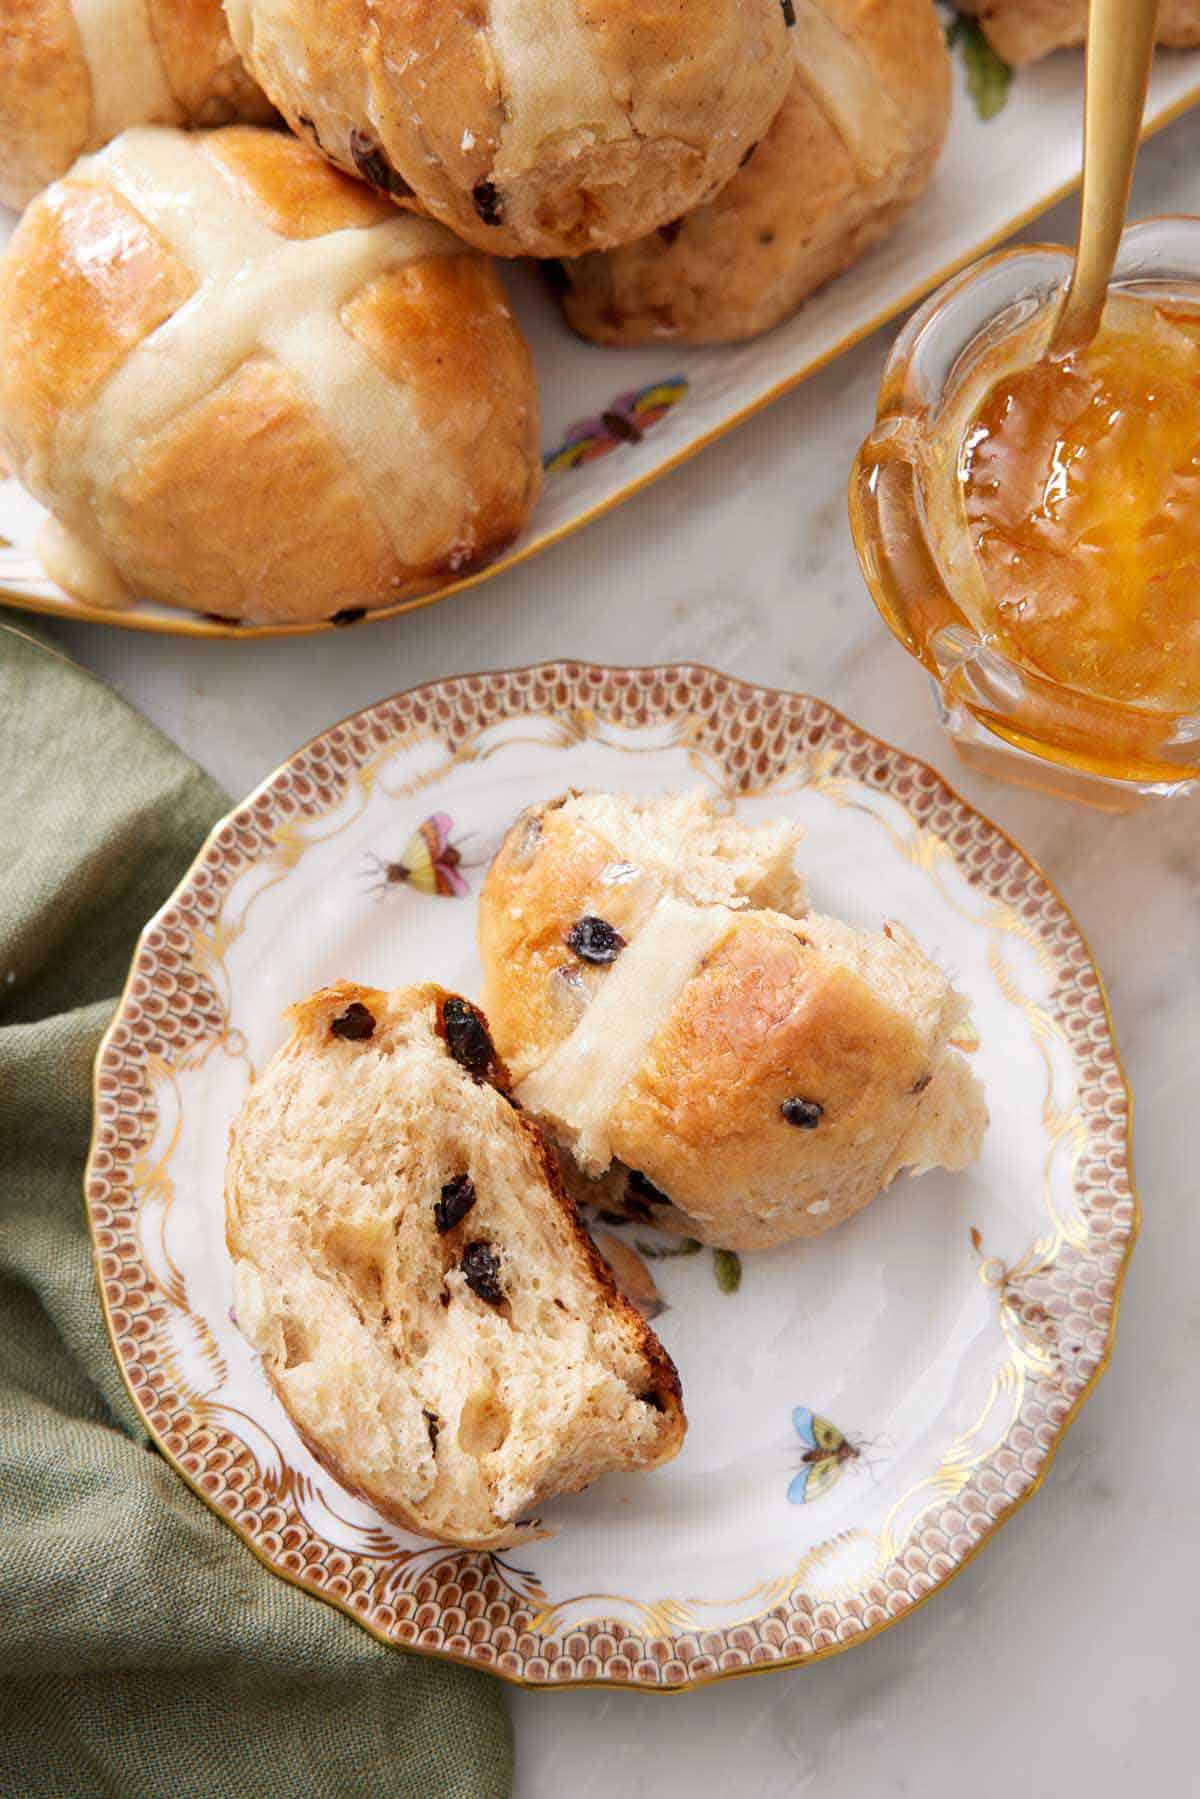 A plate with a hot cross bun torn in half. A platter of more buns and some jam off to the back.